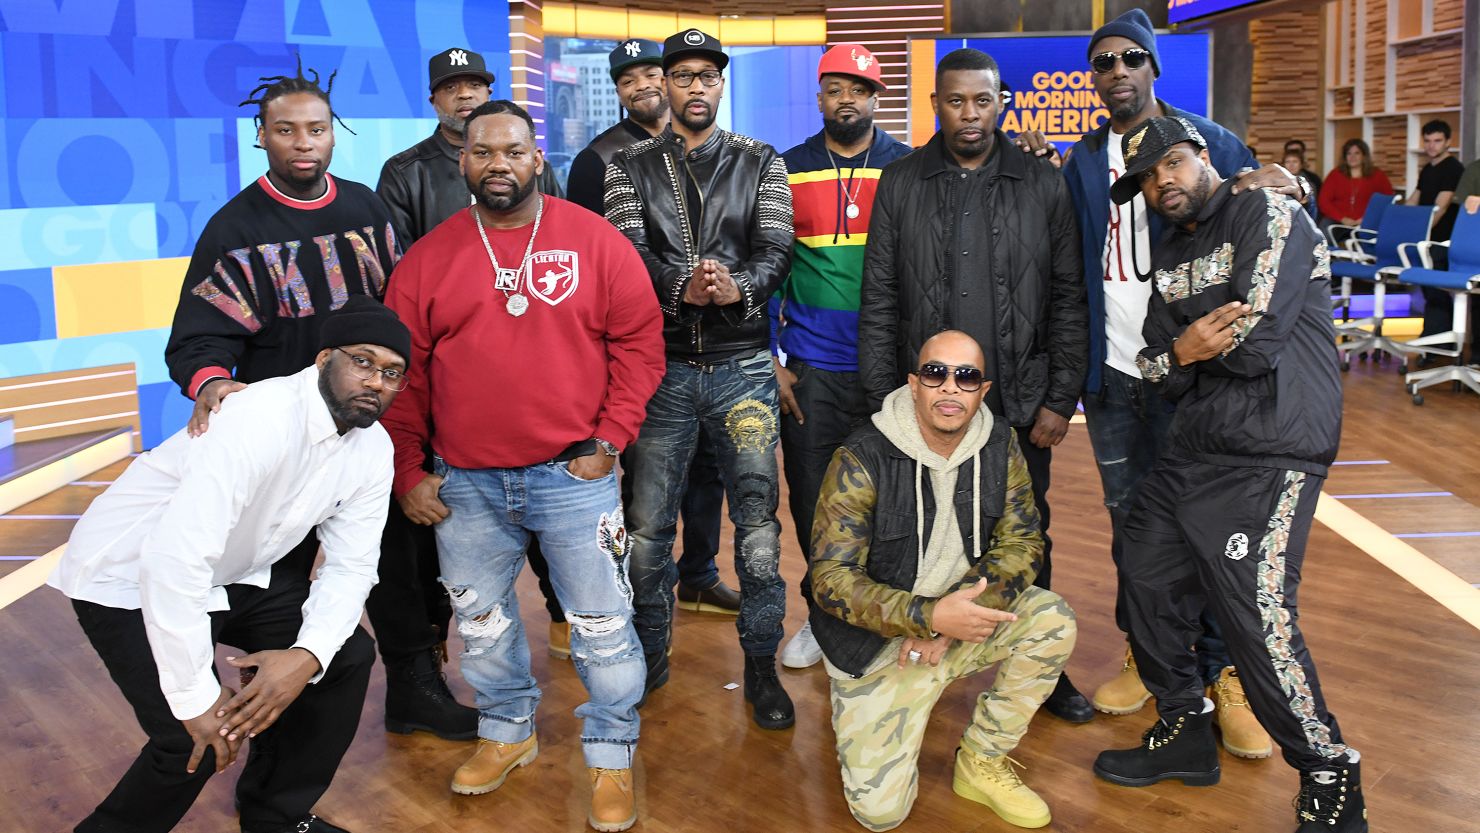 Wu-Tang Clan perform live on ABC's "Good Morning America" on November 9, 2018.  